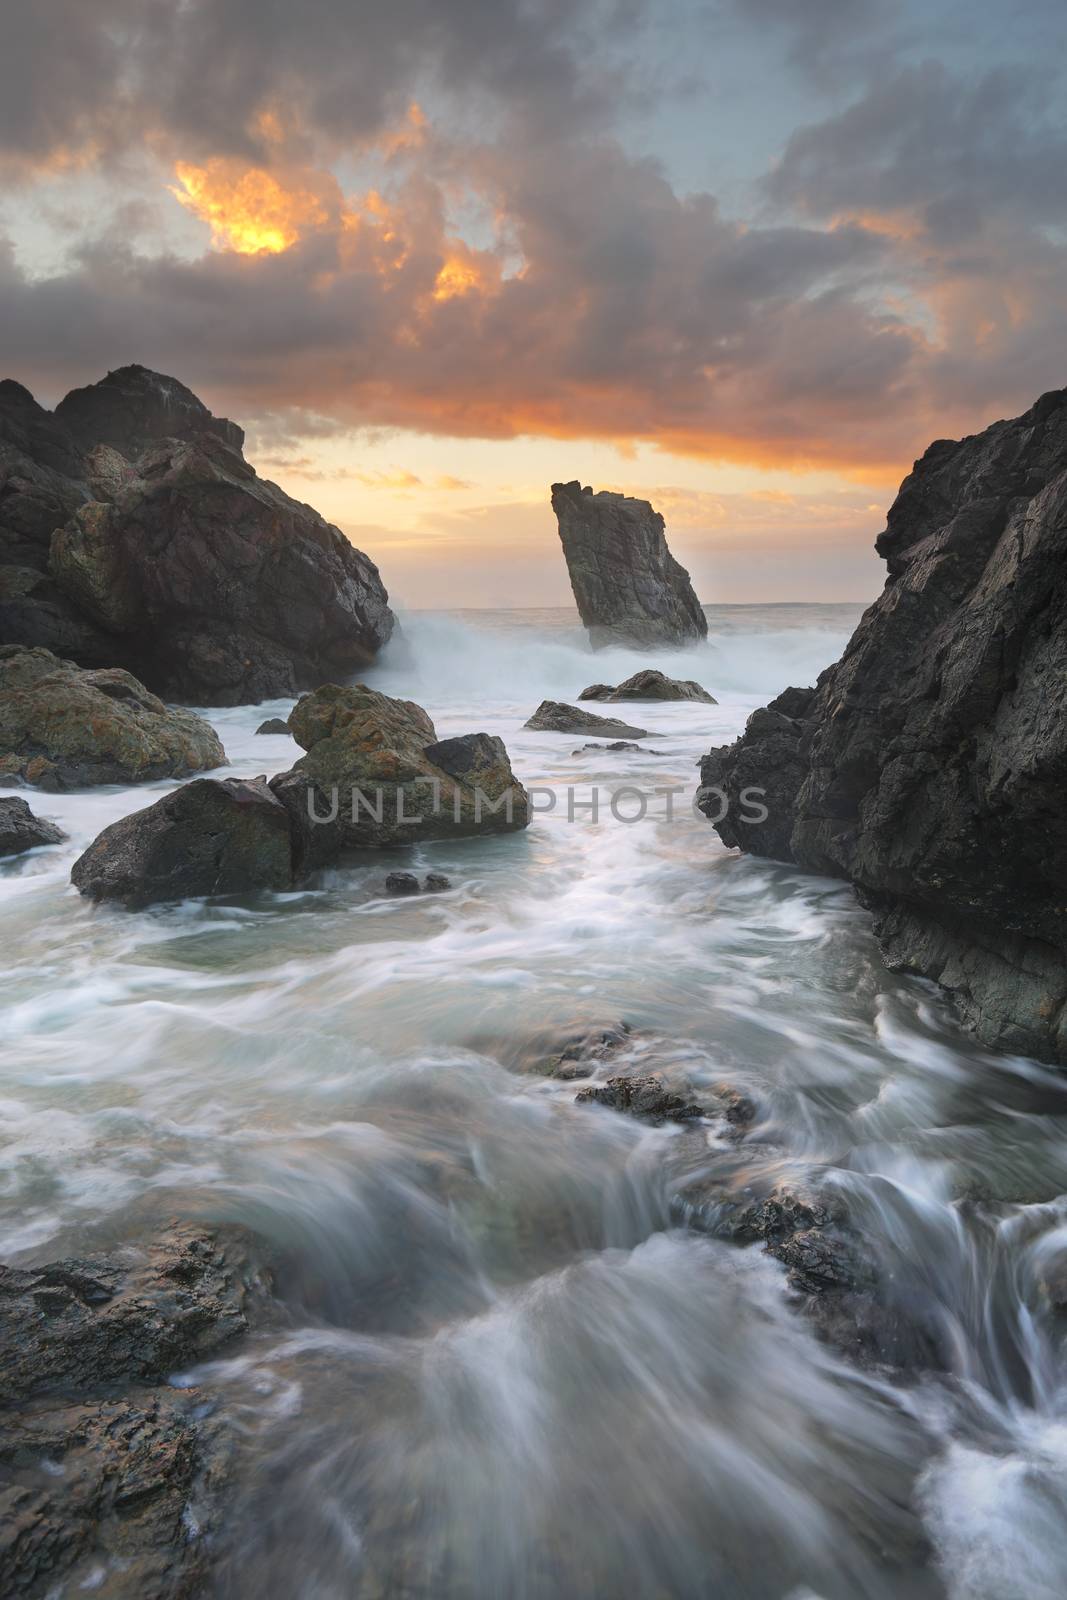 Nice flows coming through the channel of rocks at Lighthouse Beach kept things interesting at sunrise